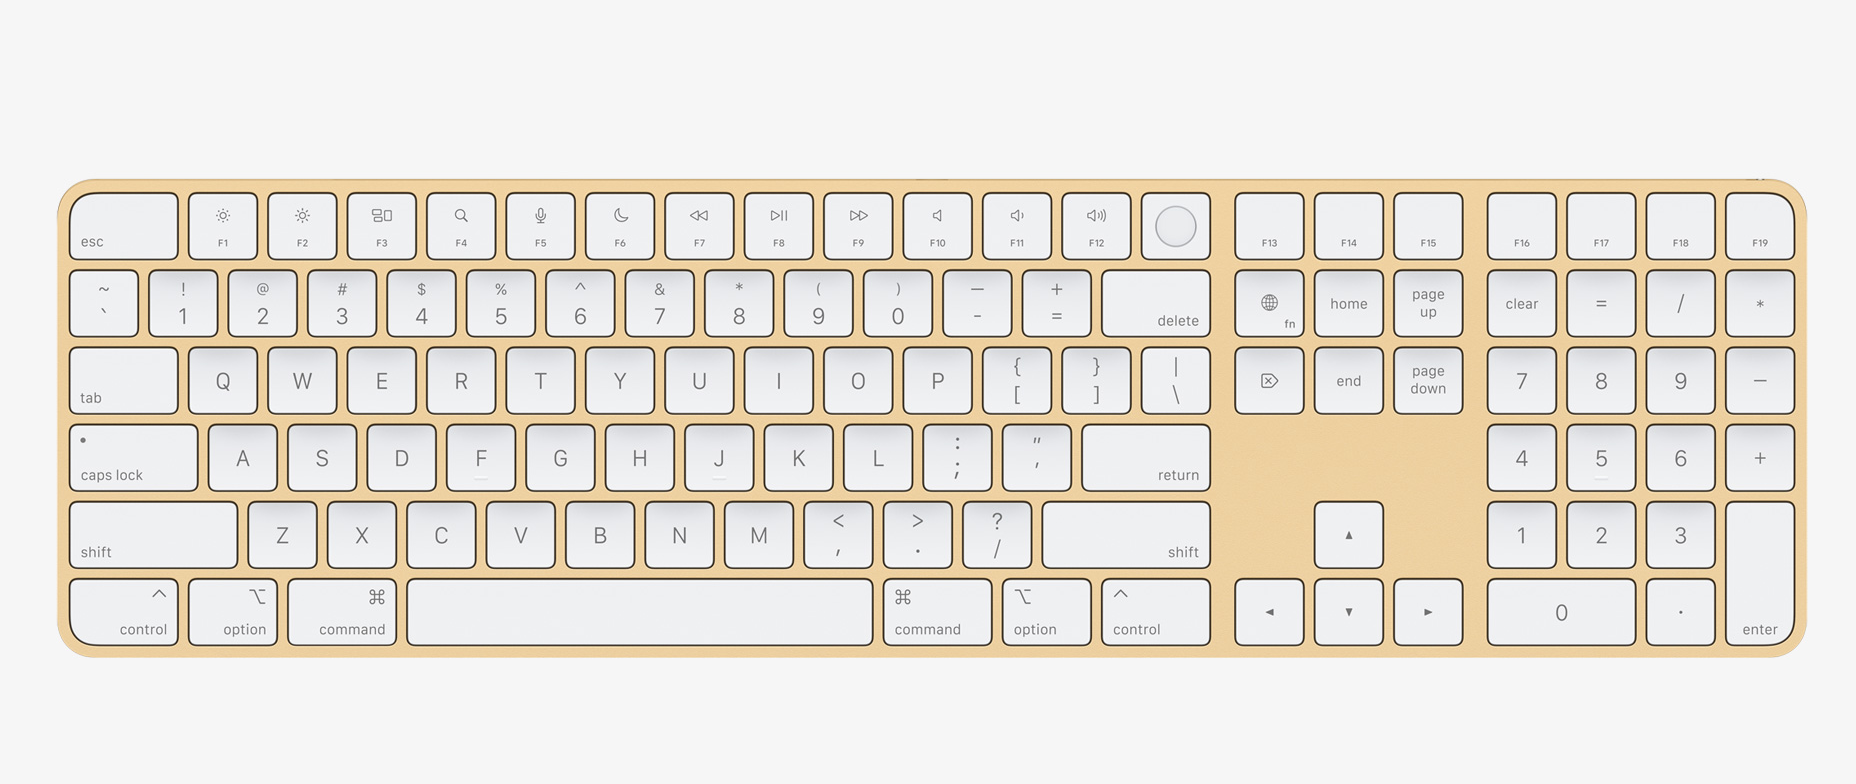 Apple debuts redesigned Magic Keyboard with Touch ID - 9to5Mac